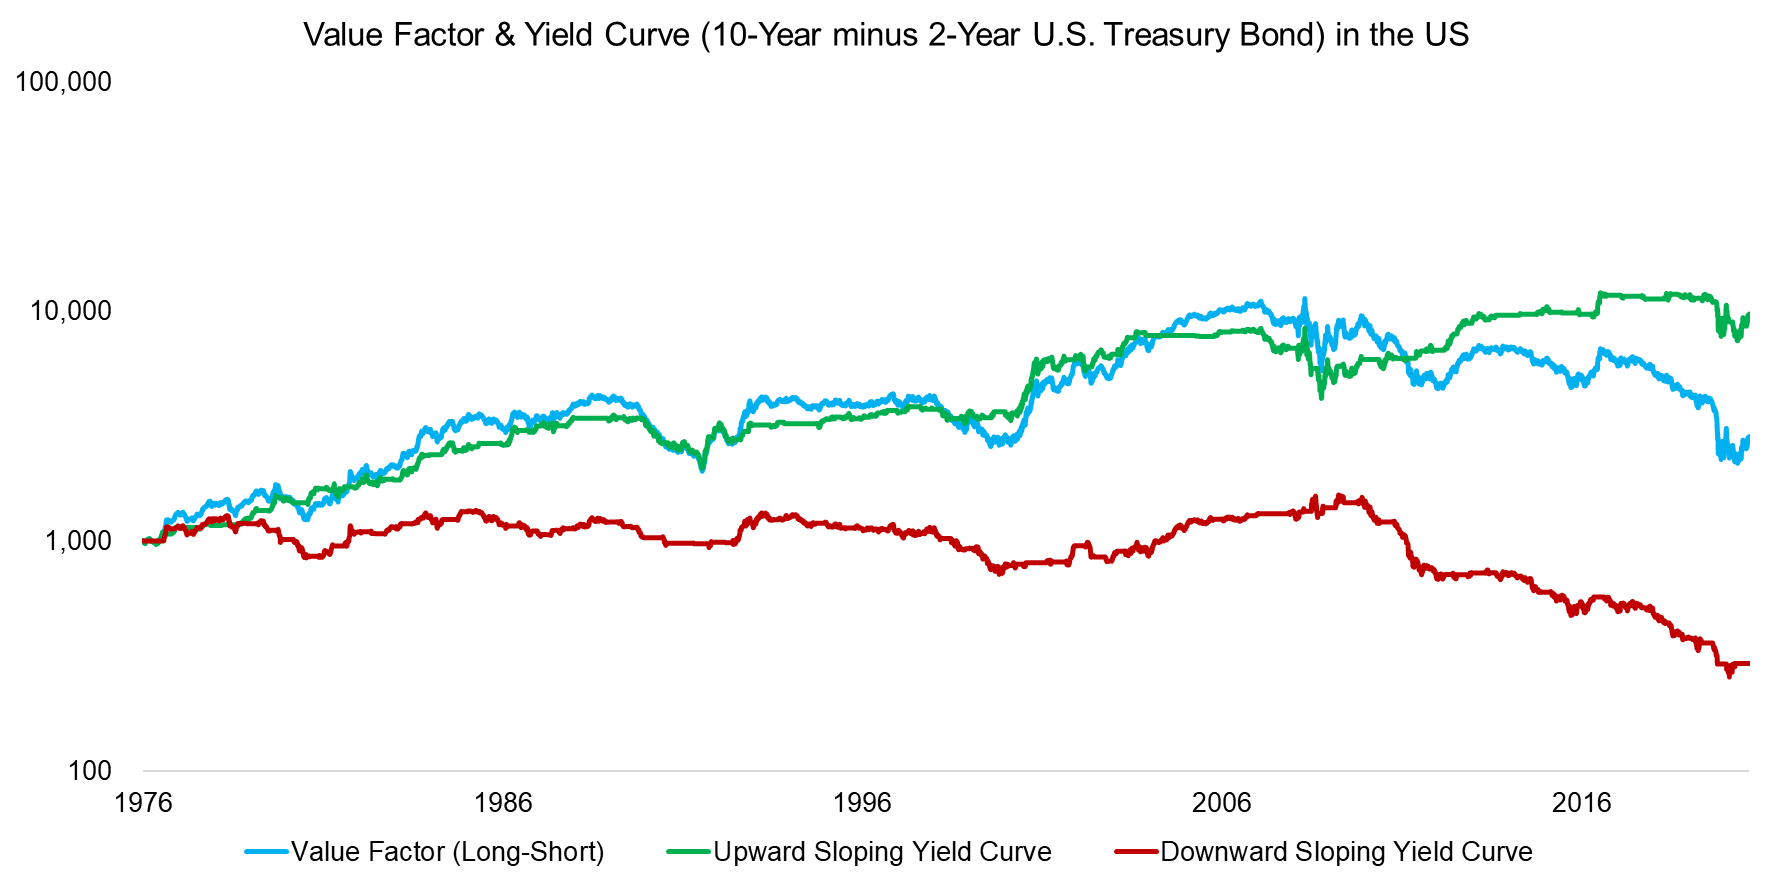 Value Factor & Yield Curve (10-Year minus 2-Year U.S. Treasury Bond) in the US